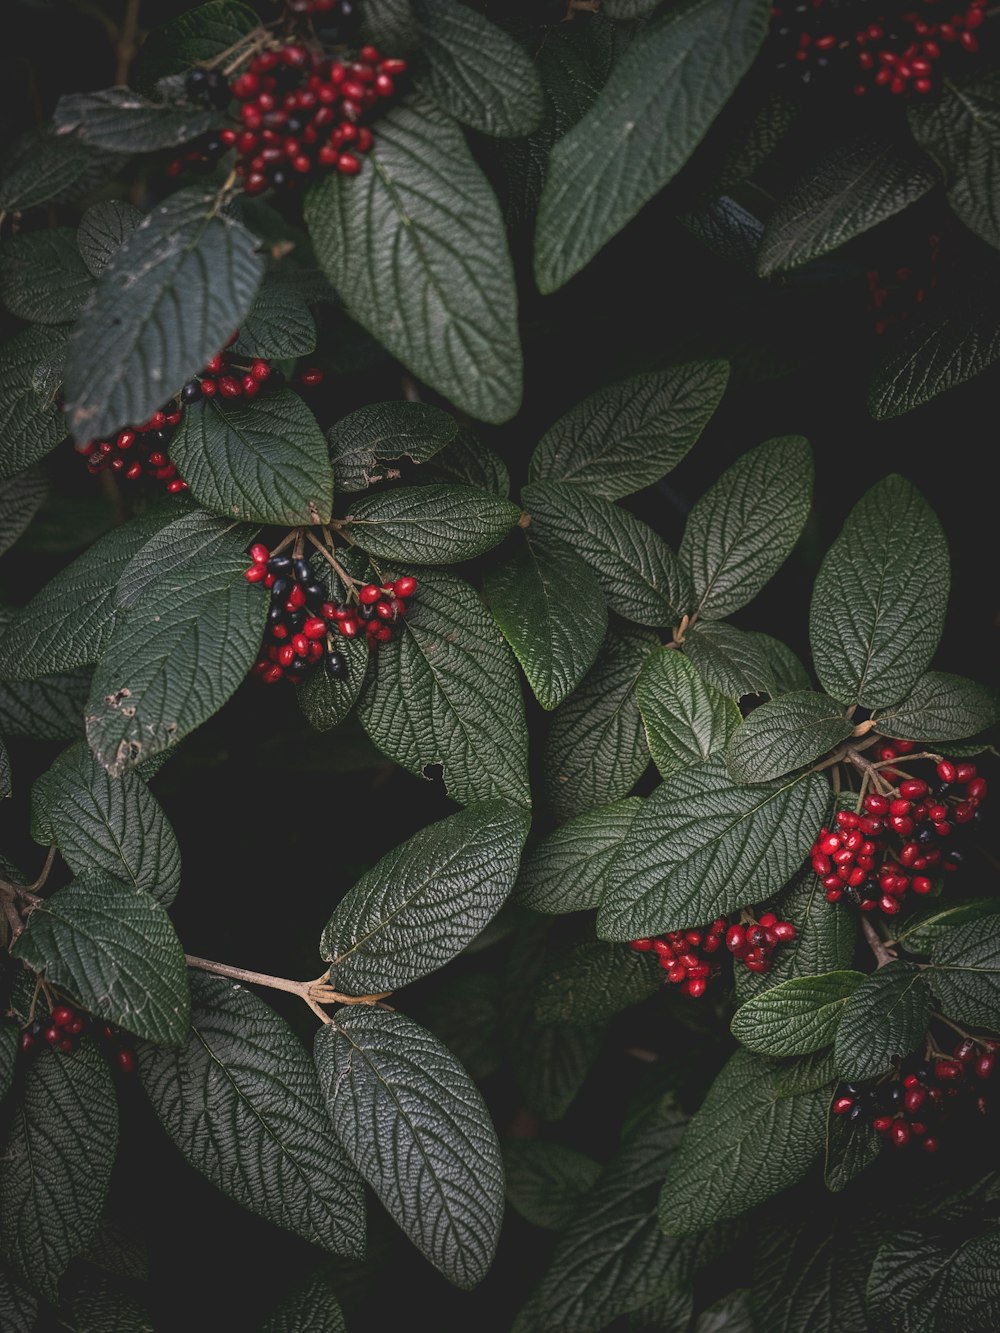 a bush with red berries and green leaves